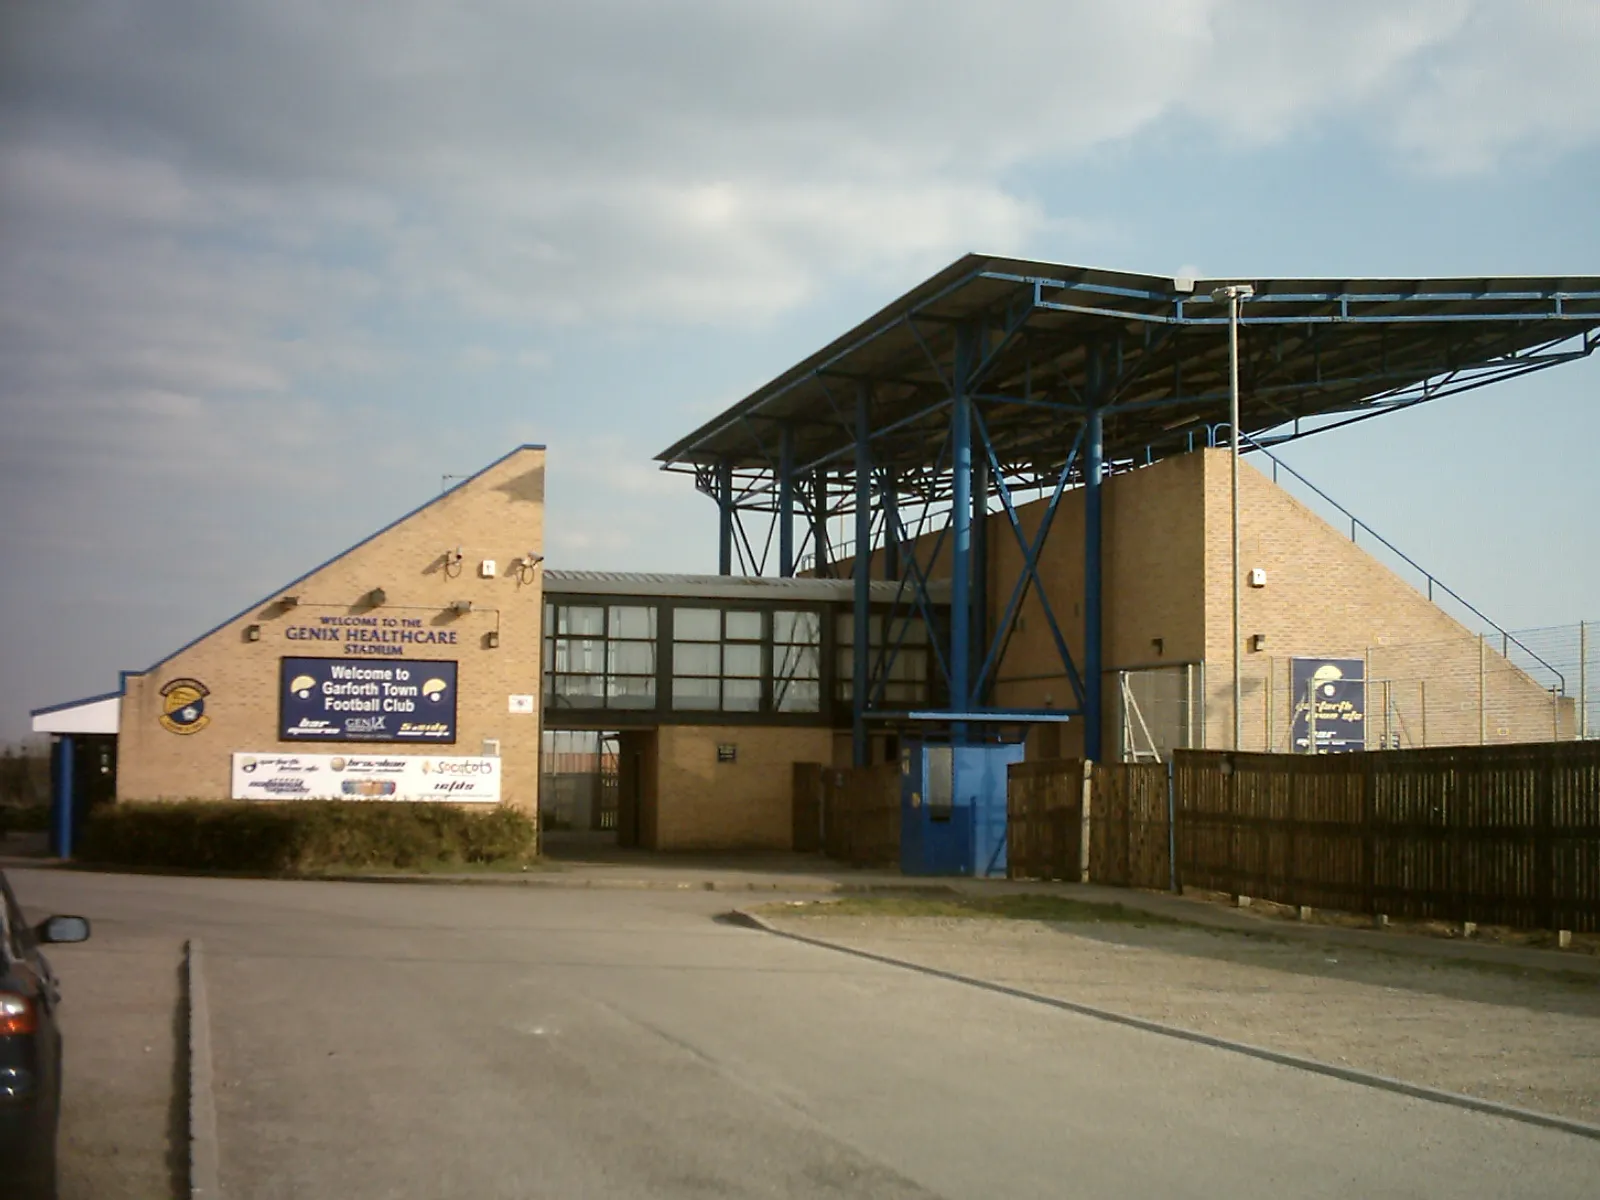 Photo showing: The Exterior of the Main Stand at the Genix Healthcare Stadium in Garforth West Yorkshire, home to Garforth Town.  Taken on the afternoon of the 1st April 2009.